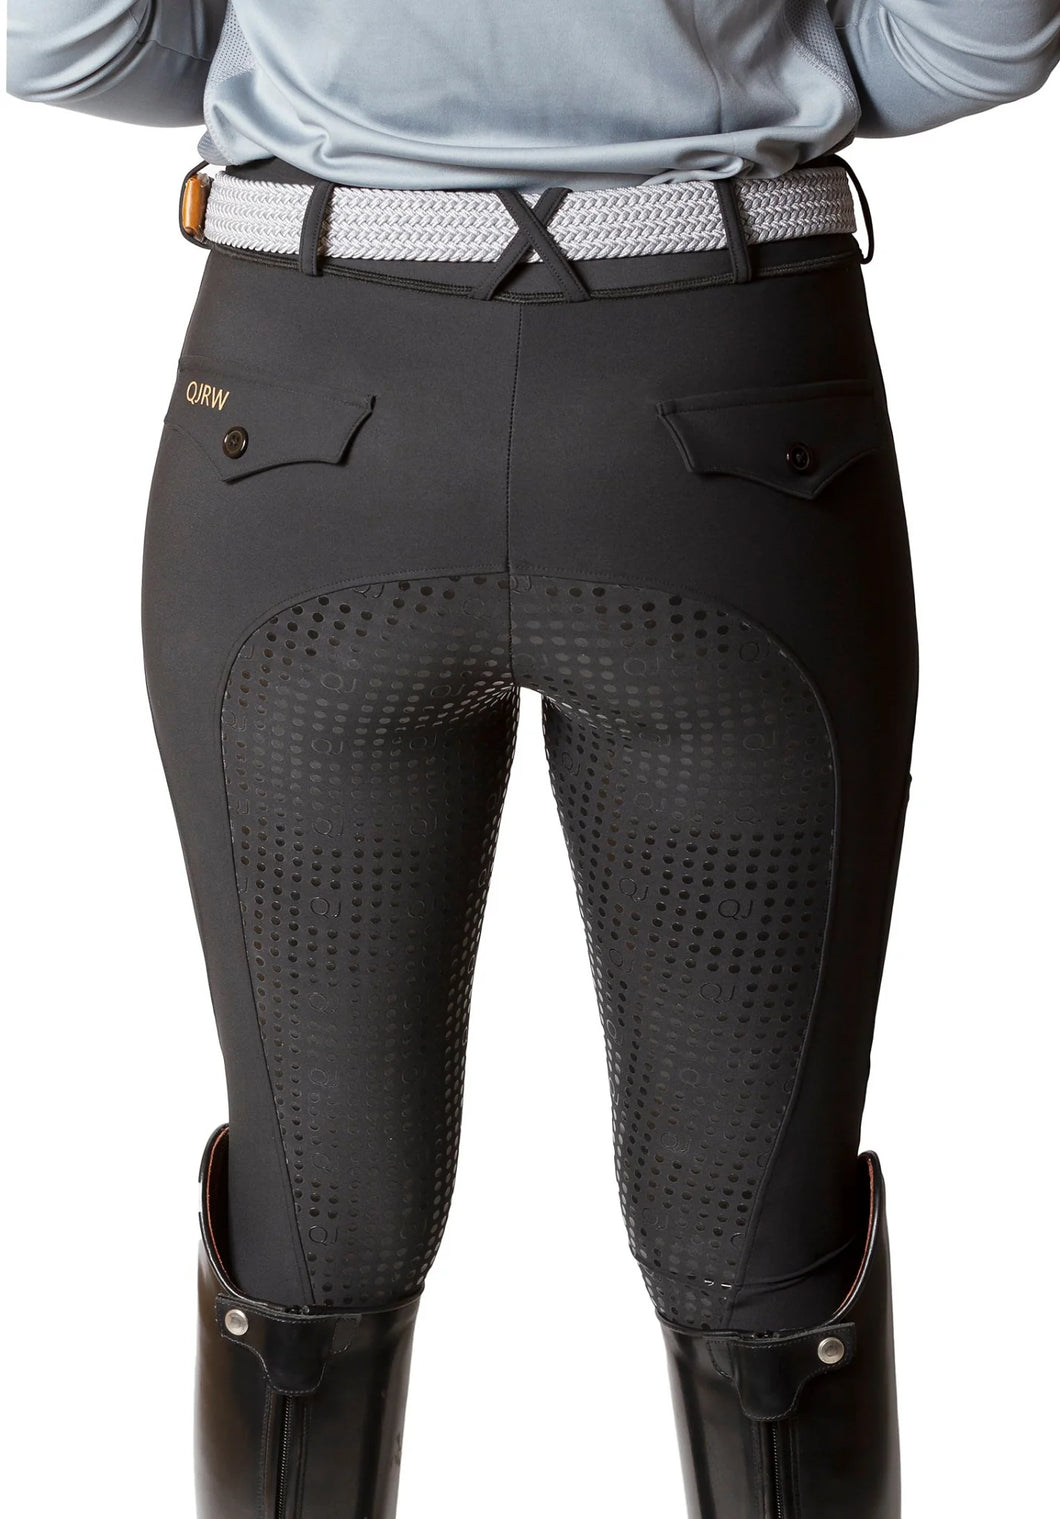 QJ - Competition Riding Tights - Black - Small - 8-10